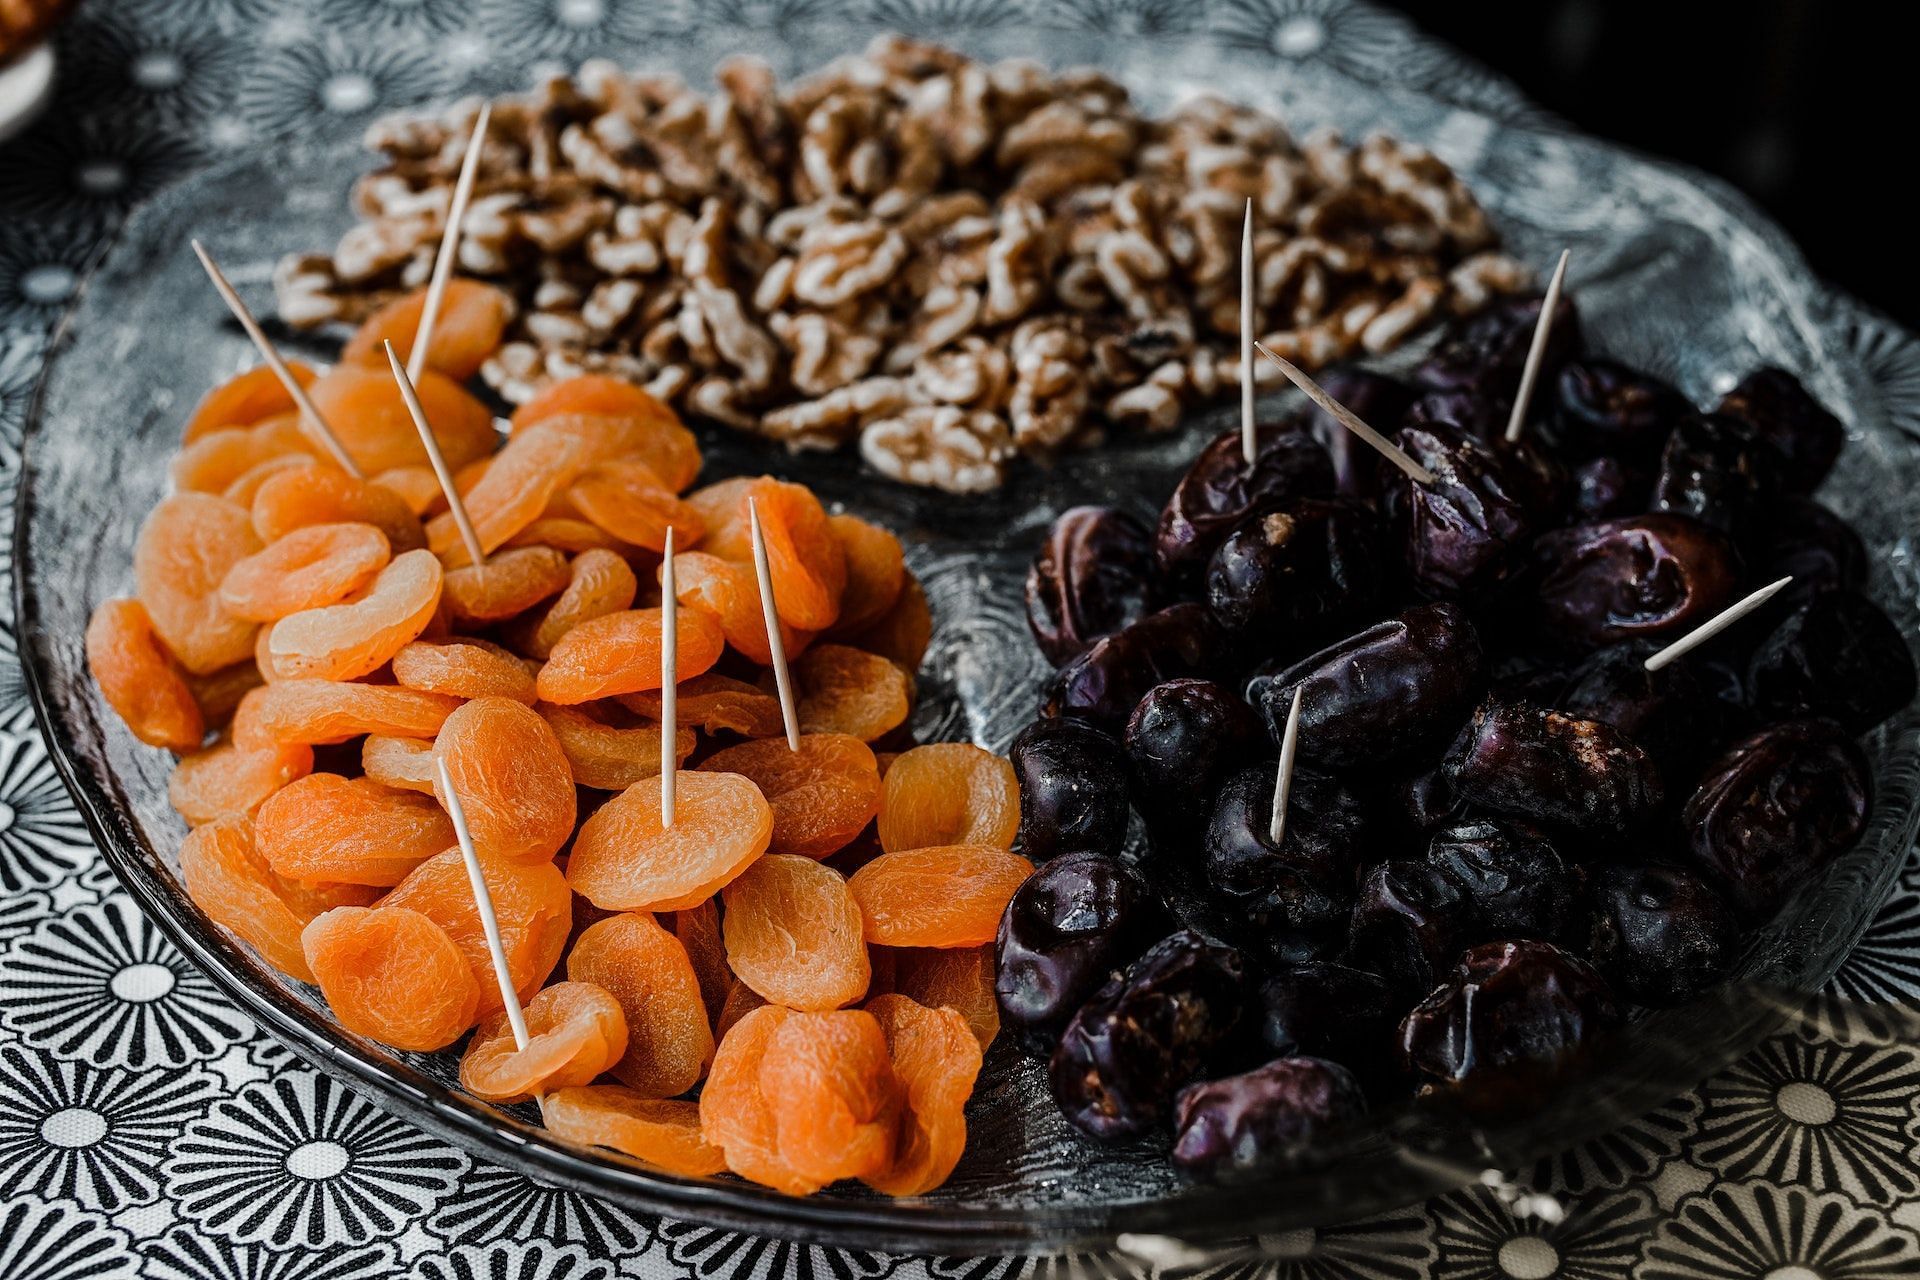 Prunes are dried plums are good for relieving constipation. (Photo via Pexels/Mushtaq Hussain)